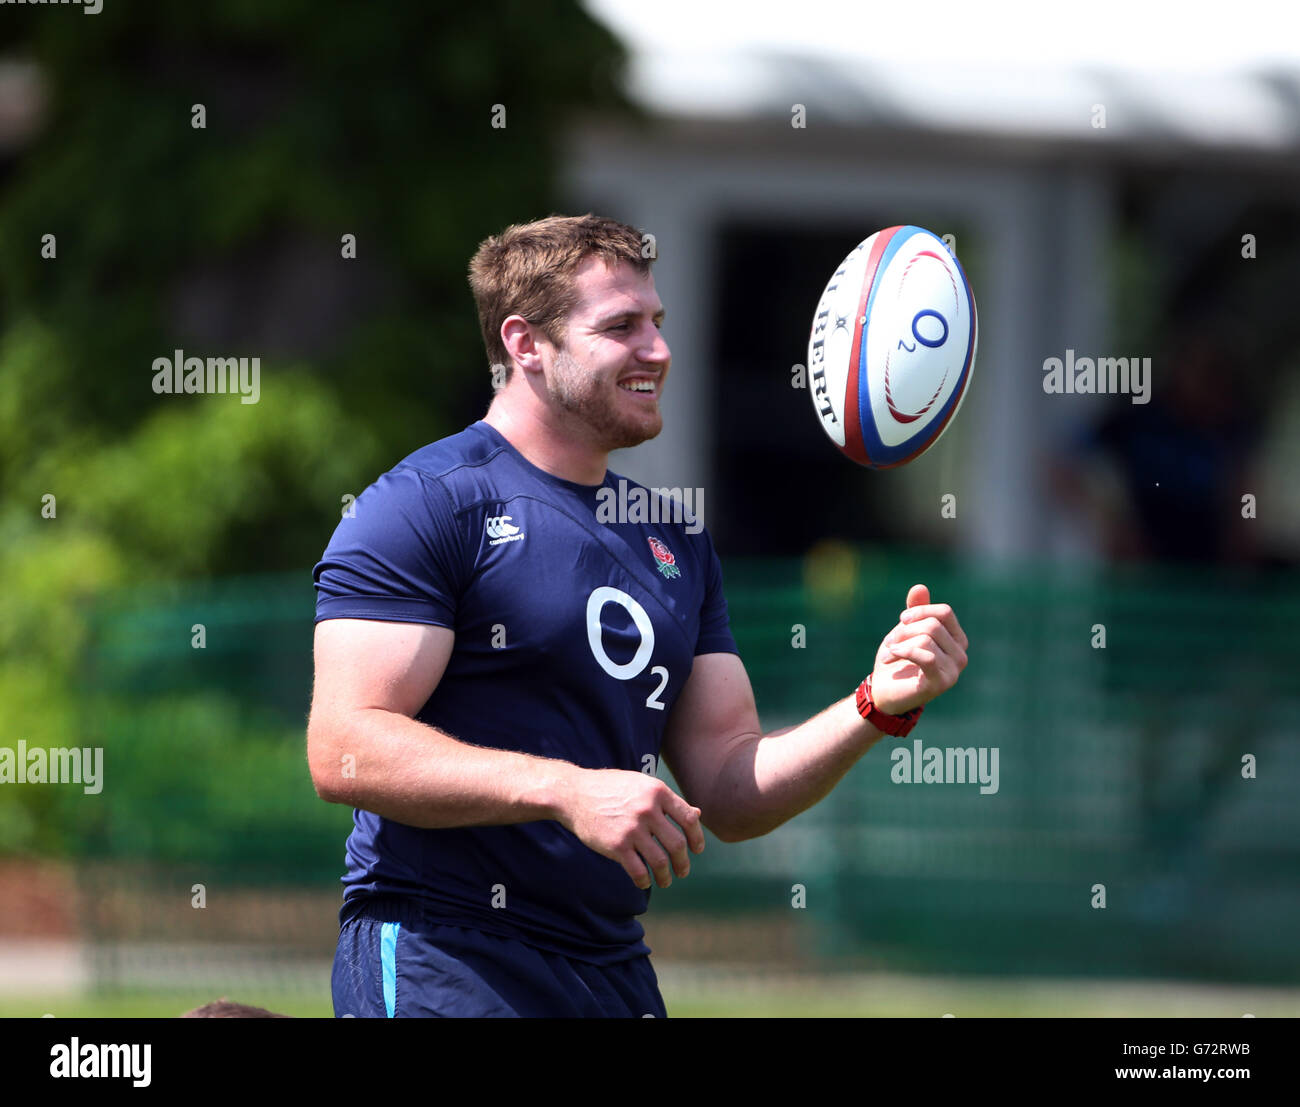 Rugby Union - Session de formation - Angleterre Lensbury Pitch Banque D'Images